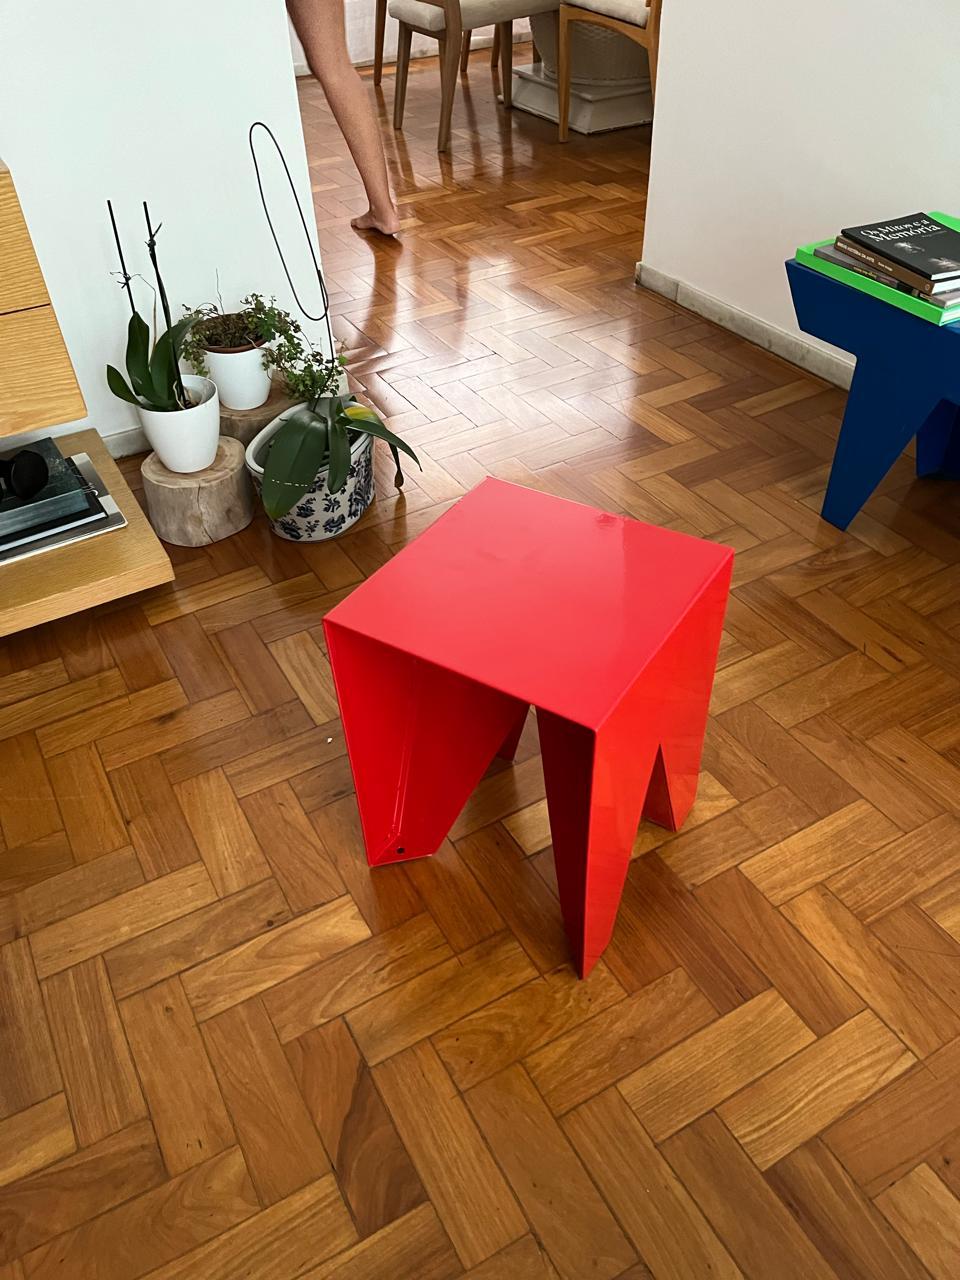 Designed with the vernacular and traditional form of the Minas Gerais farm stools in mind, the ID stool is part of the Gerais family, developed by designer / artist Olavo Machado Neto in a tribute to the Brazilian crafstsmanship tradition.

With a